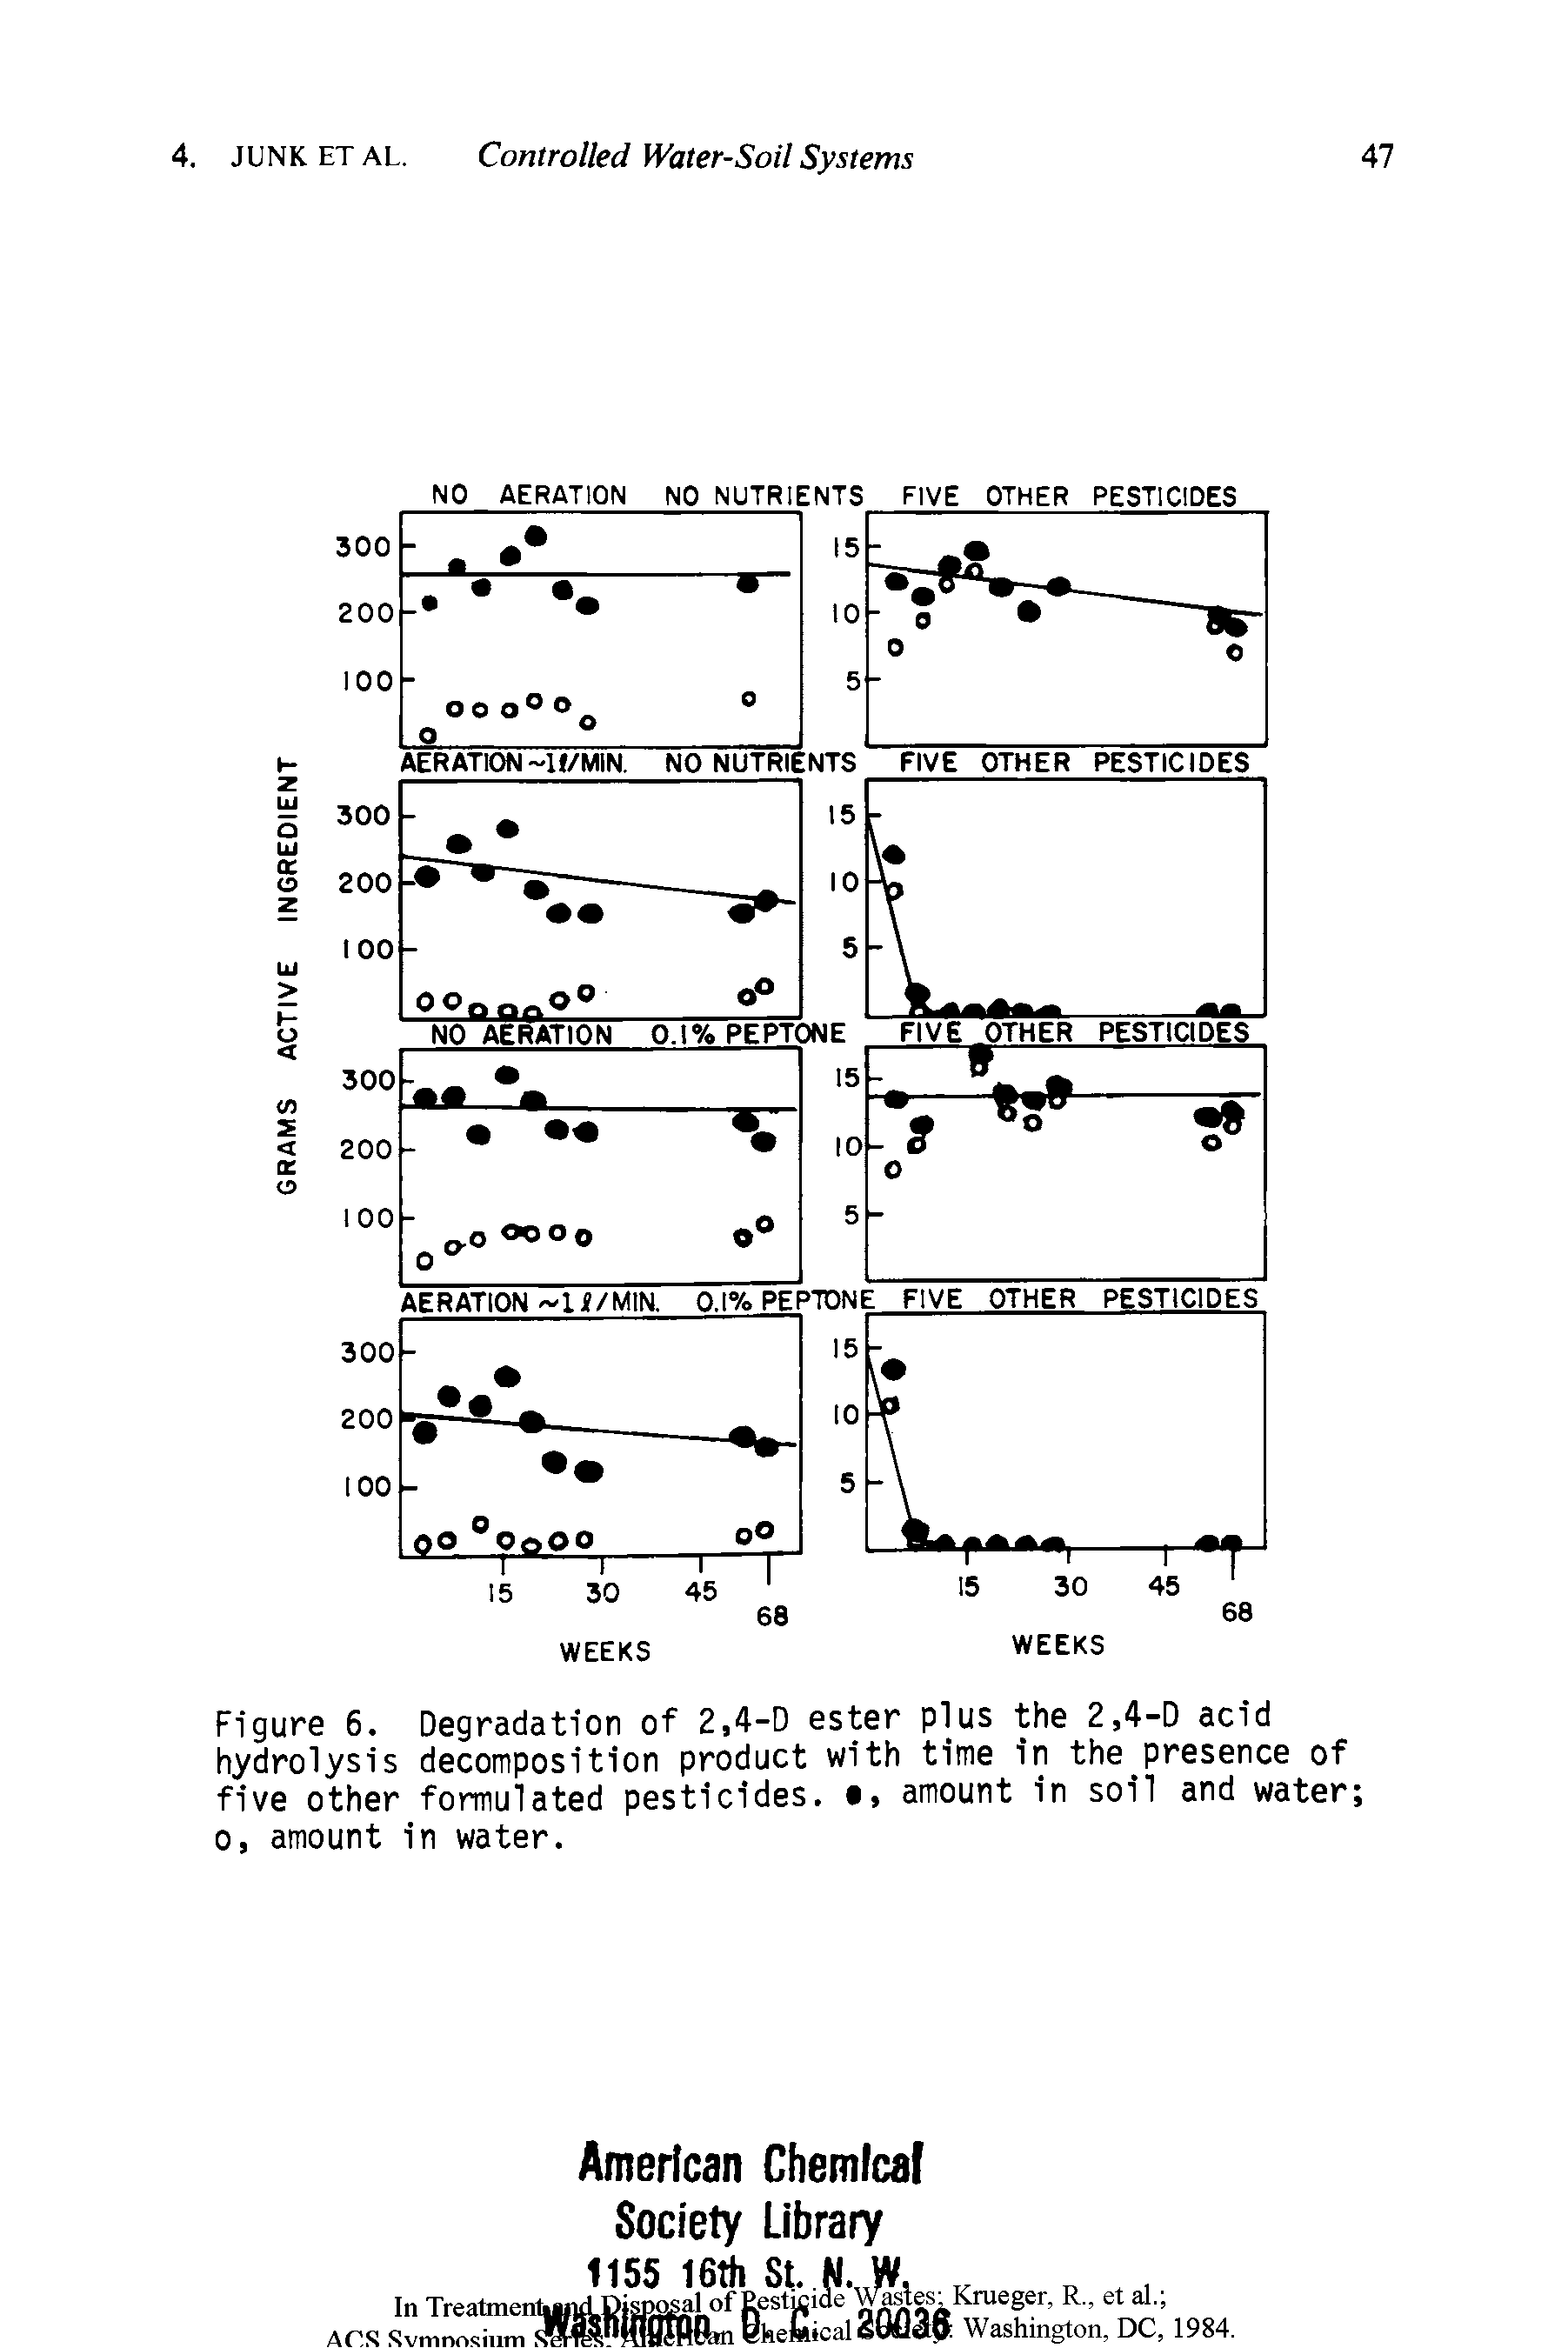 Figure 6. Degradation of 2,4-D ester plus the 2,4-D acid hydrolysis decomposition product with time in the presence of five other formulated pesticides. amount in soil and water 0, amount in water.